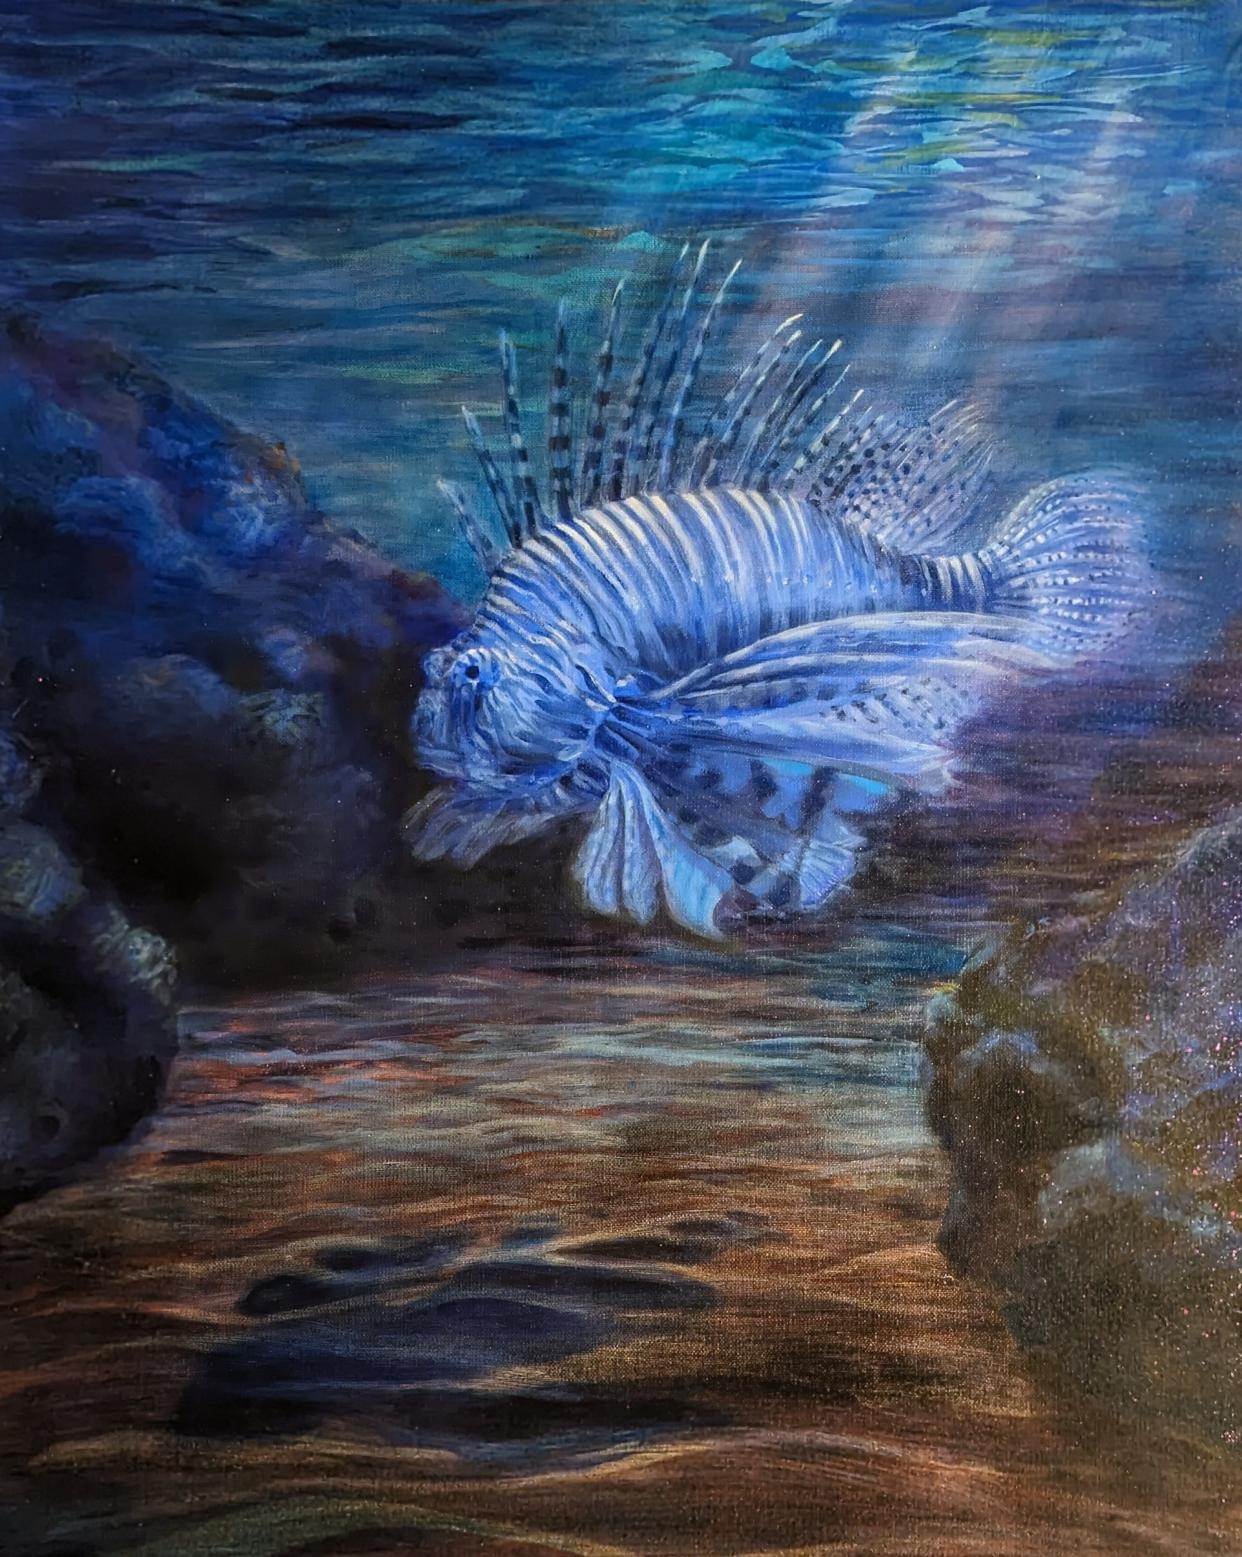 “Lionfish” oil painting by Cleo Huggins.